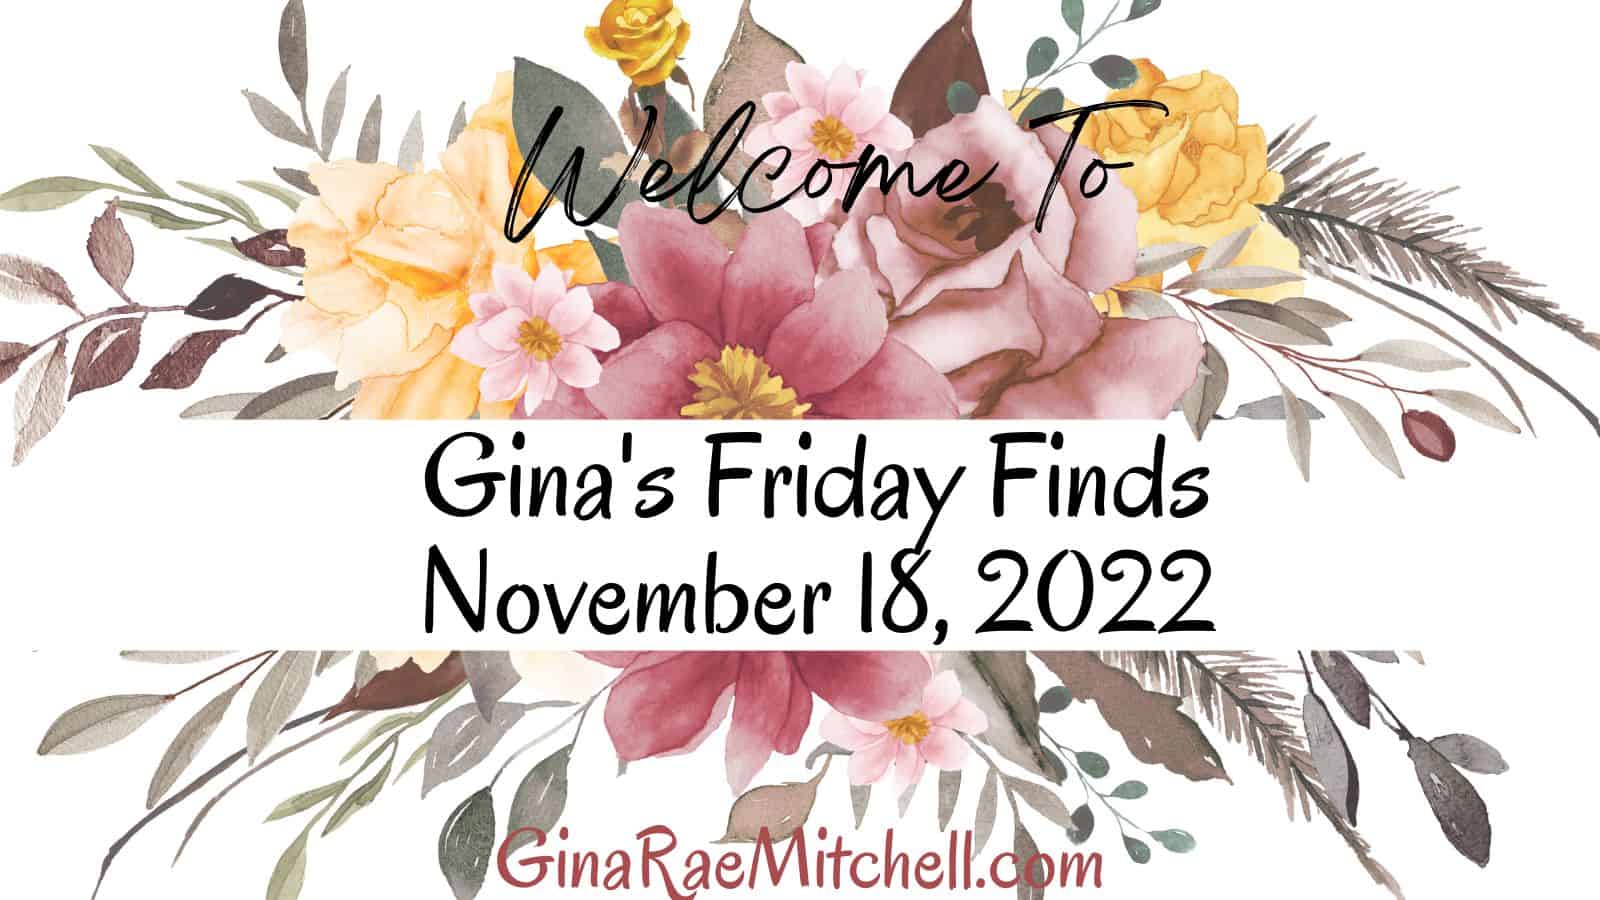 The November 18, 2022 Friday Finds are here with a new Author of the Week, Giftable Book Recs, Recipes, & More Happy News